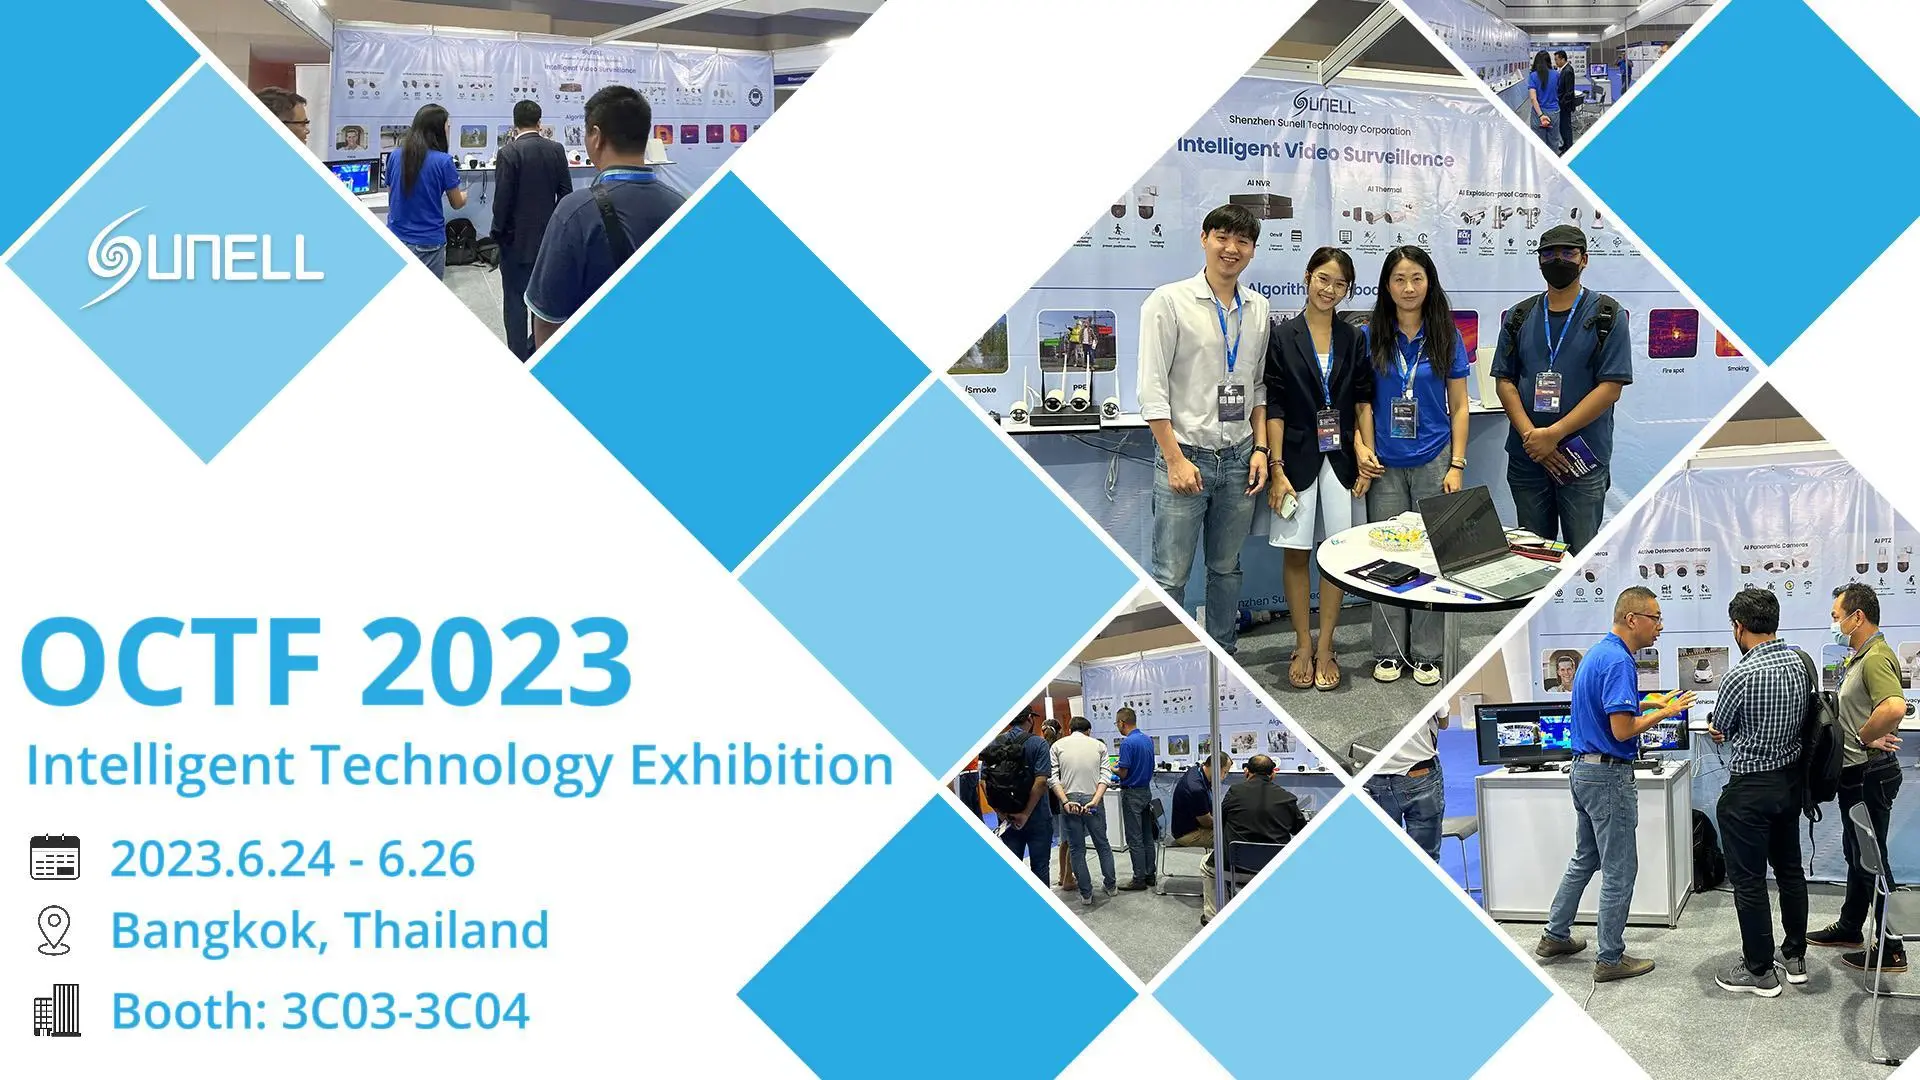 Sunell Excels at the 2023 OCTF in Bangkok, Showcasing Innovative Solutions - 翻译中...